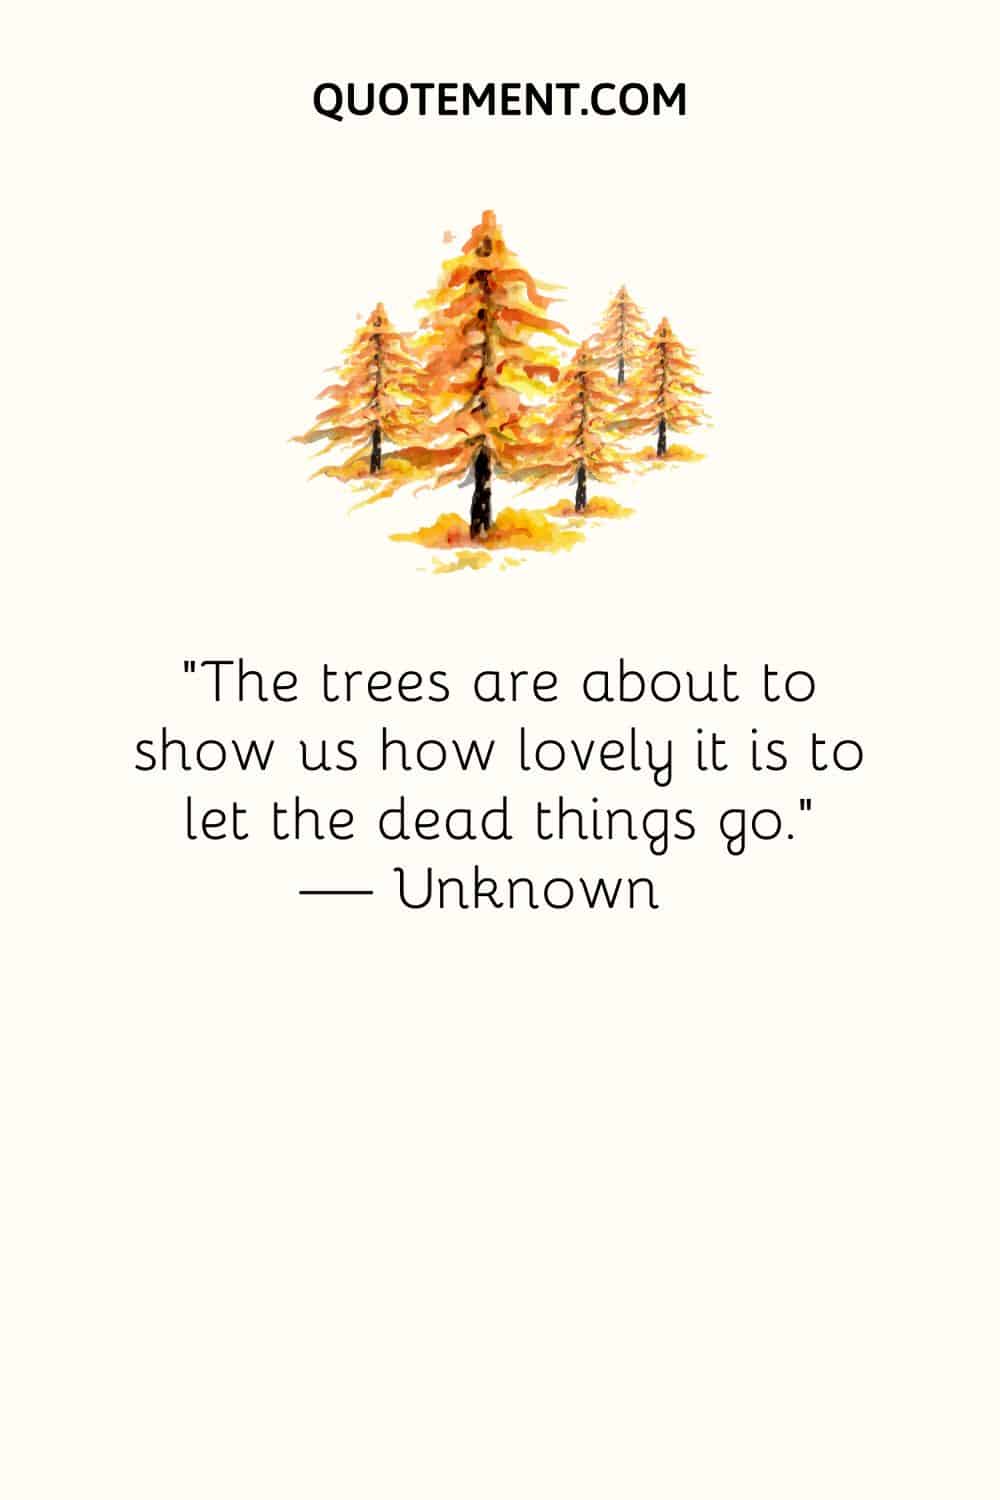 “The trees are about to show us how lovely it is to let the dead things go.” — Unknown